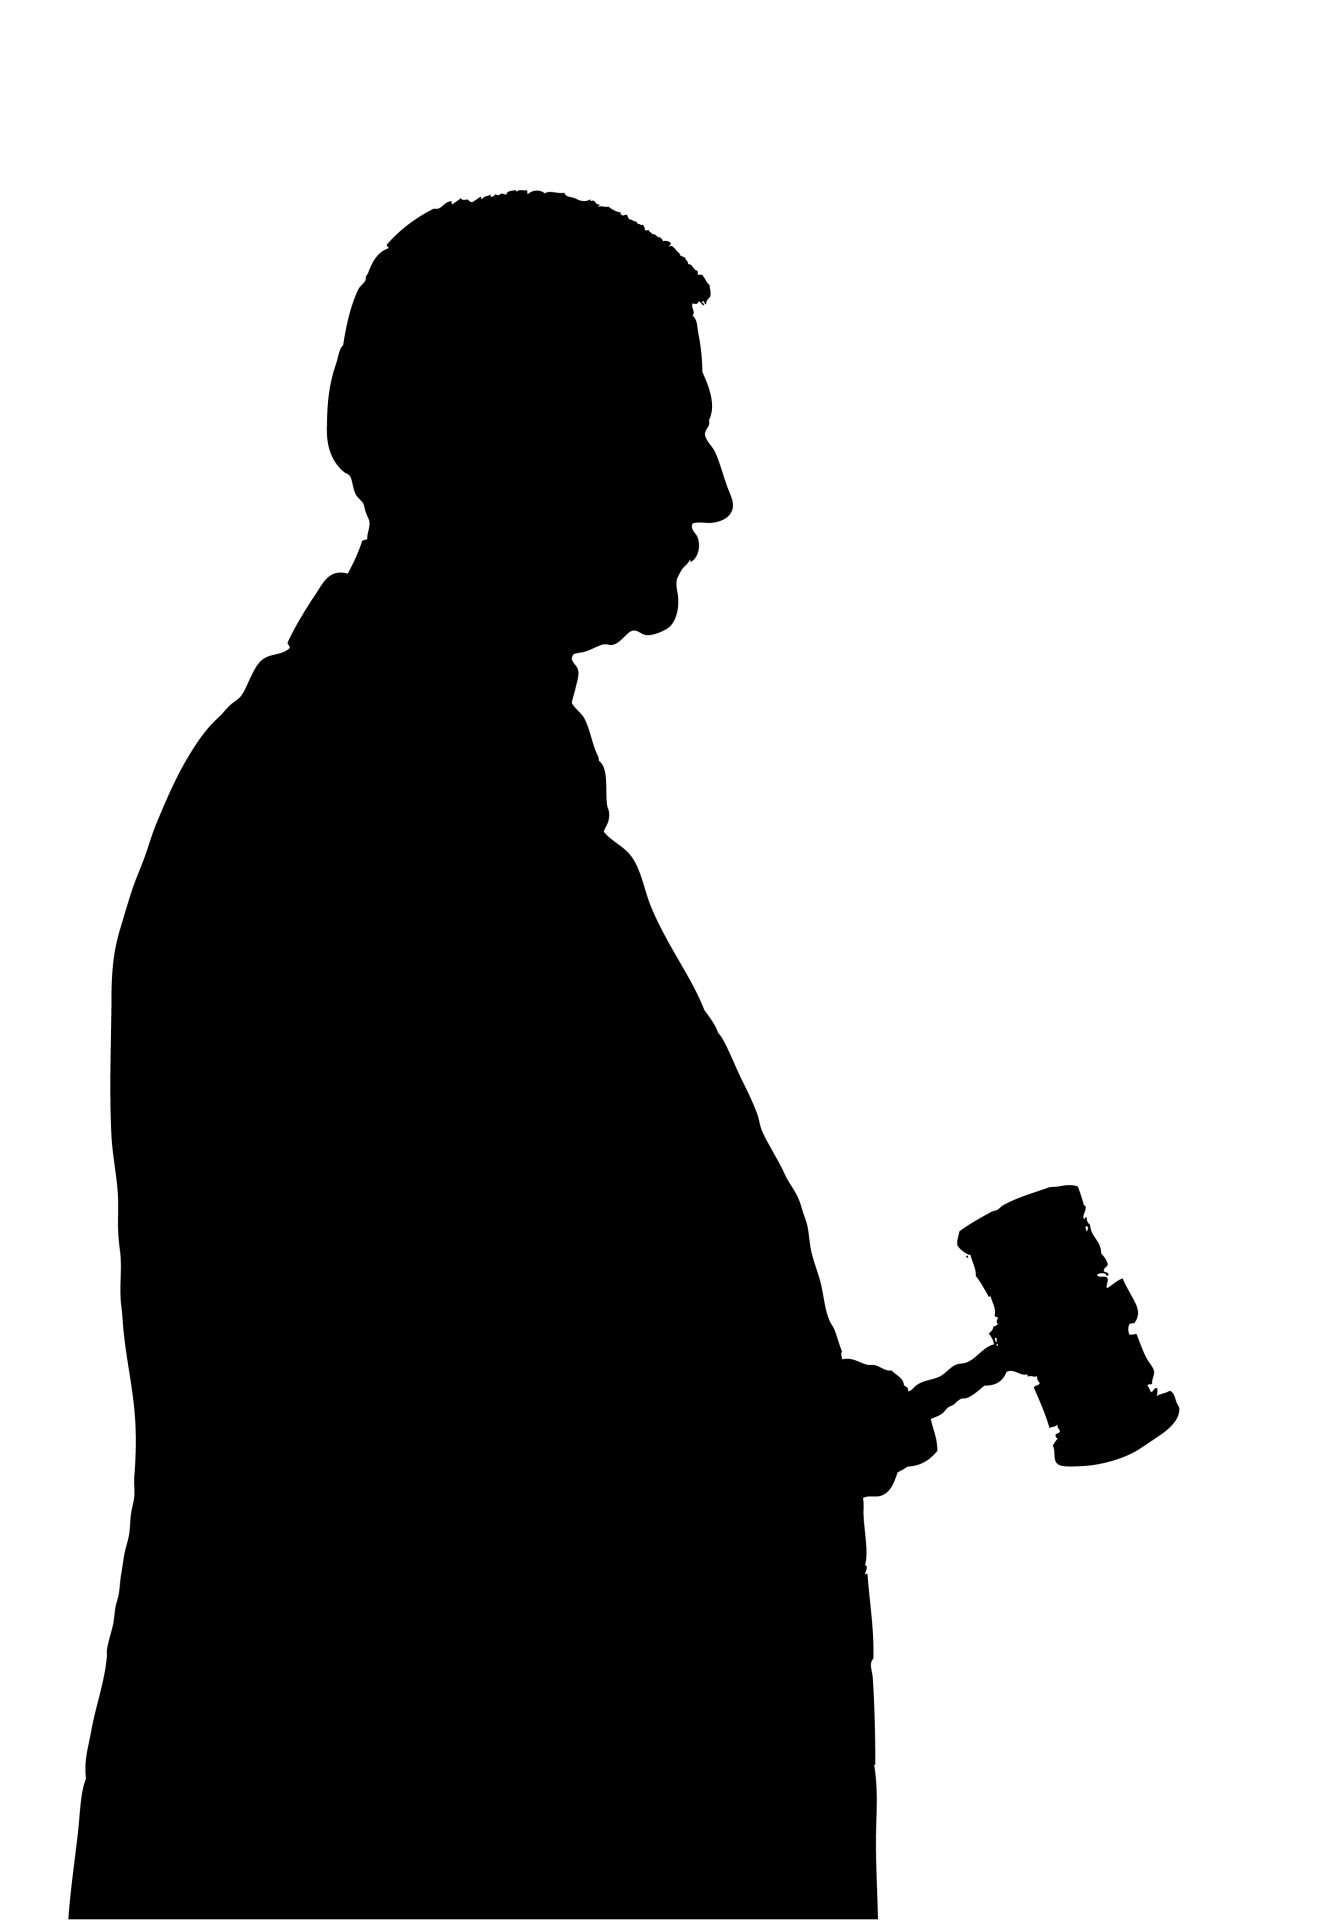 Black silhouette of a man holding a gavel clipart